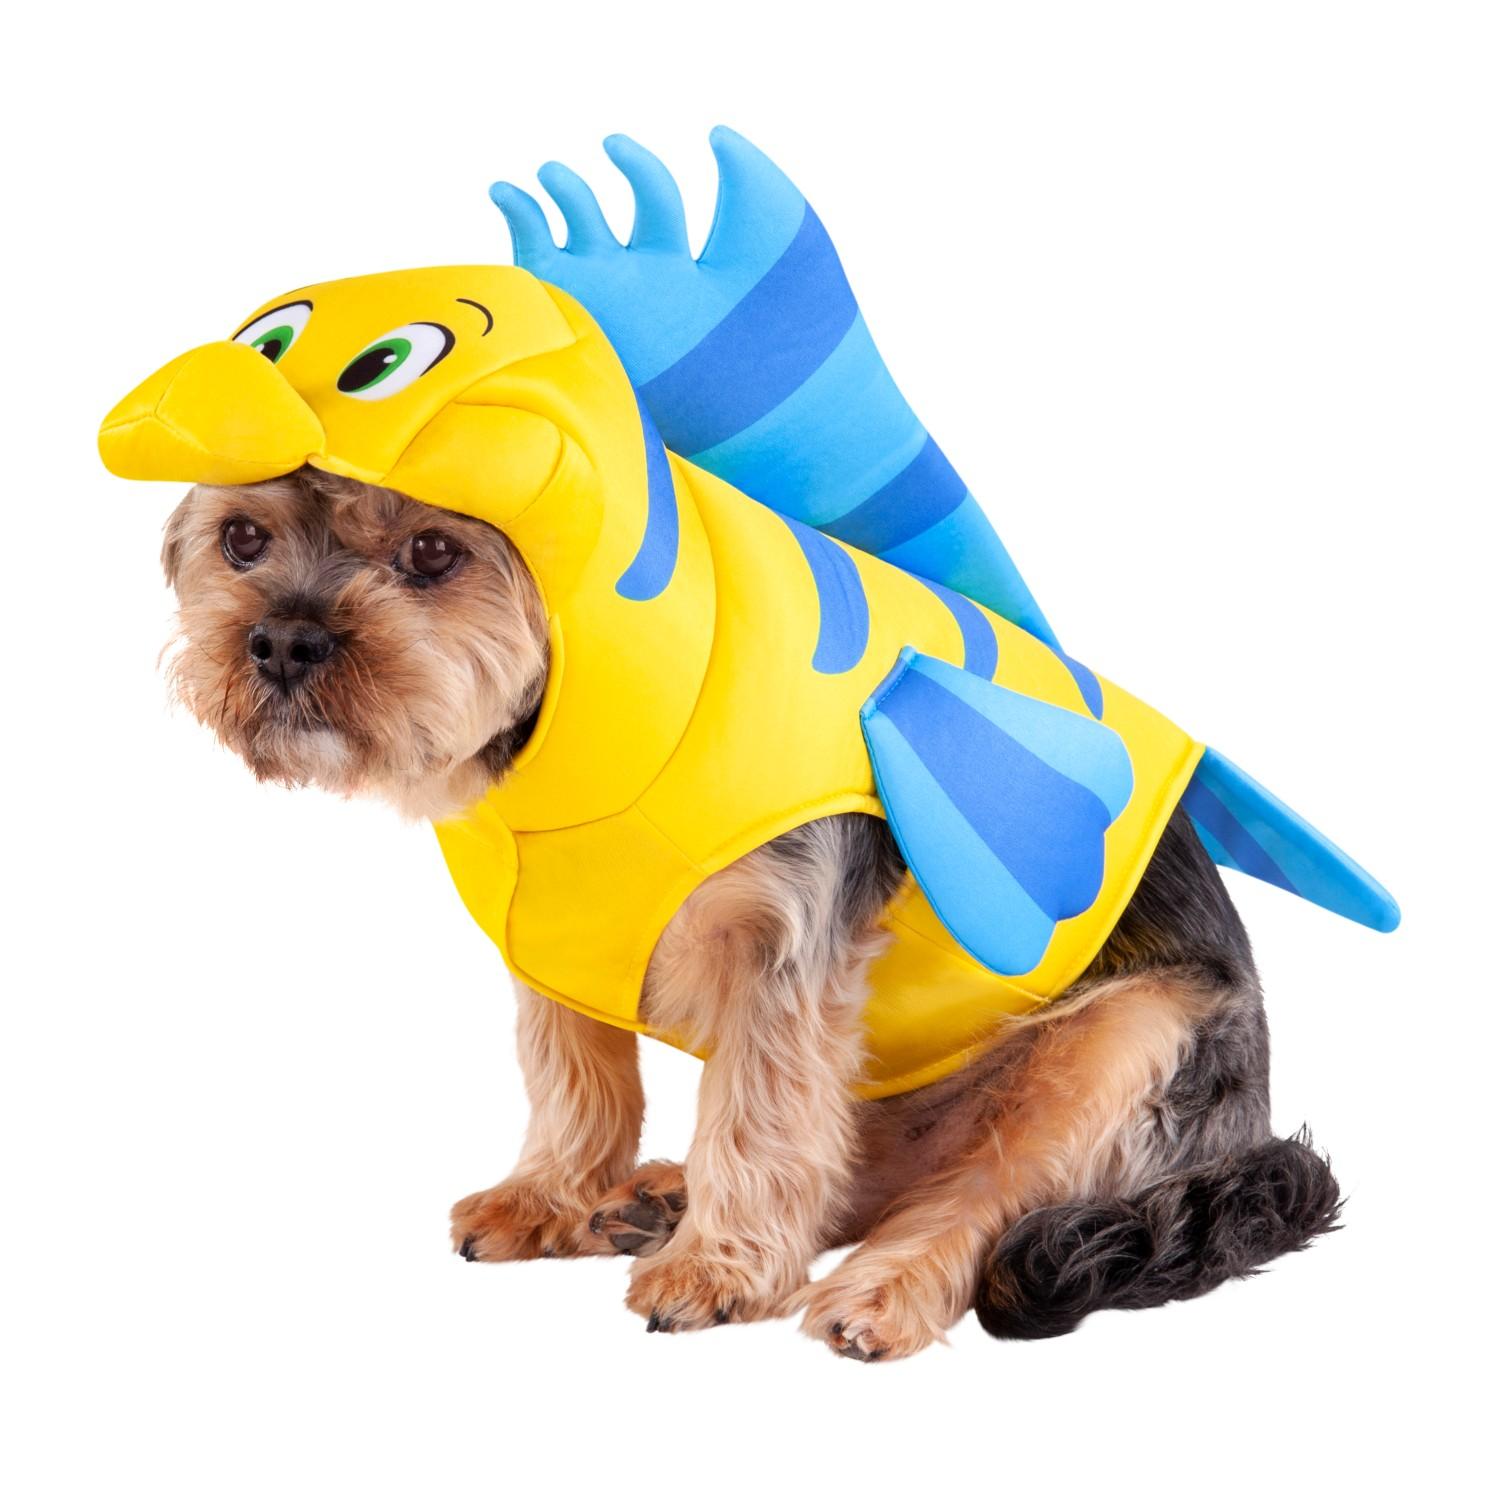 The Little Mermaid Flounder Dog Costume by Rubies